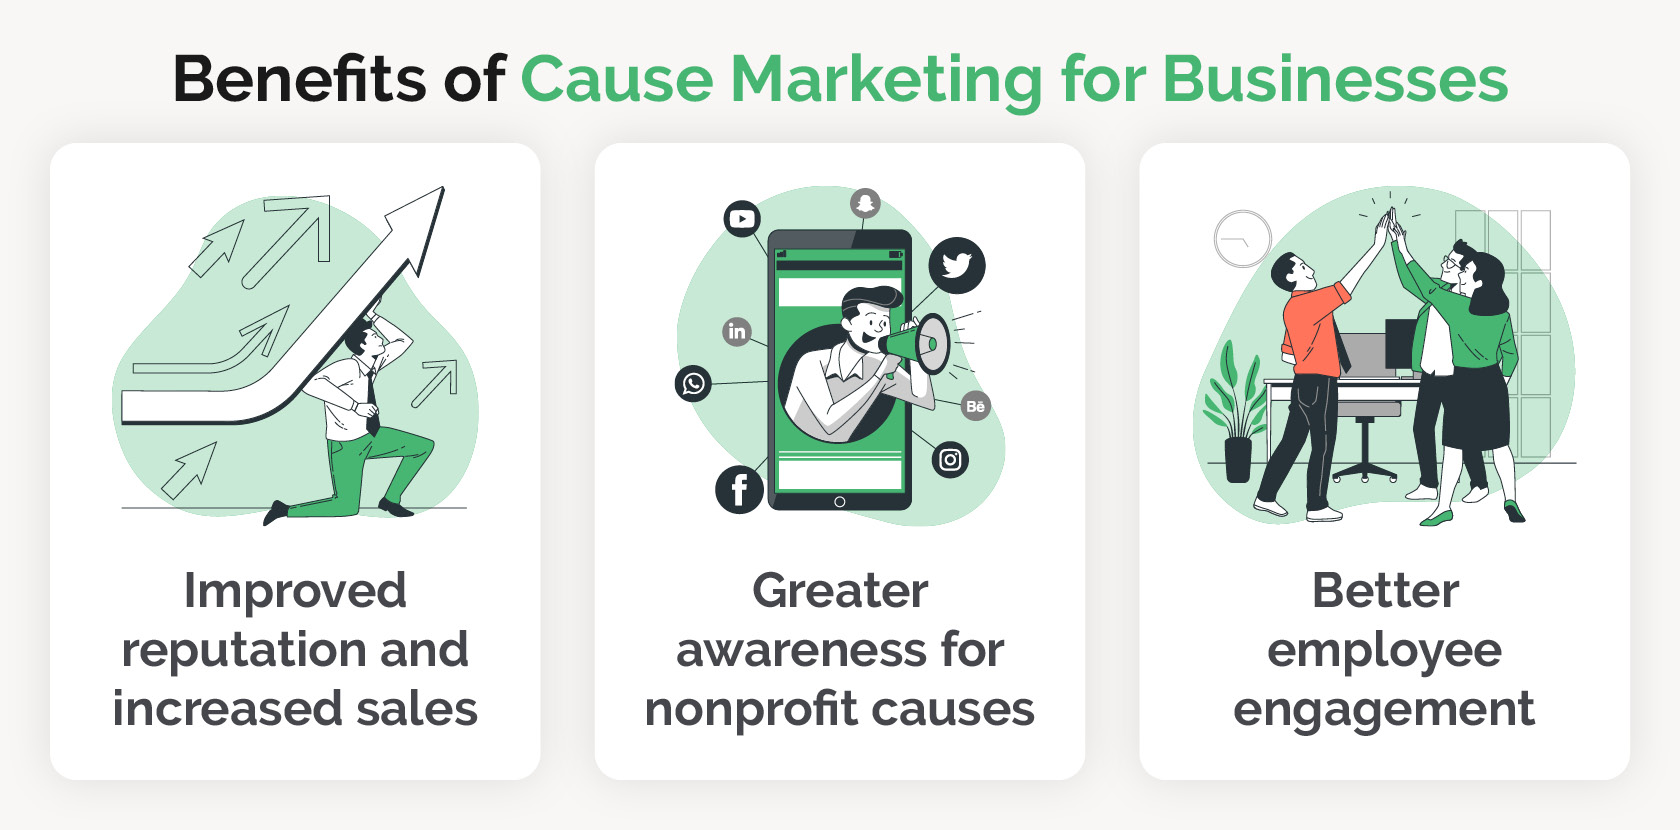 This image shows the benefits of cause marketing for businesses. 